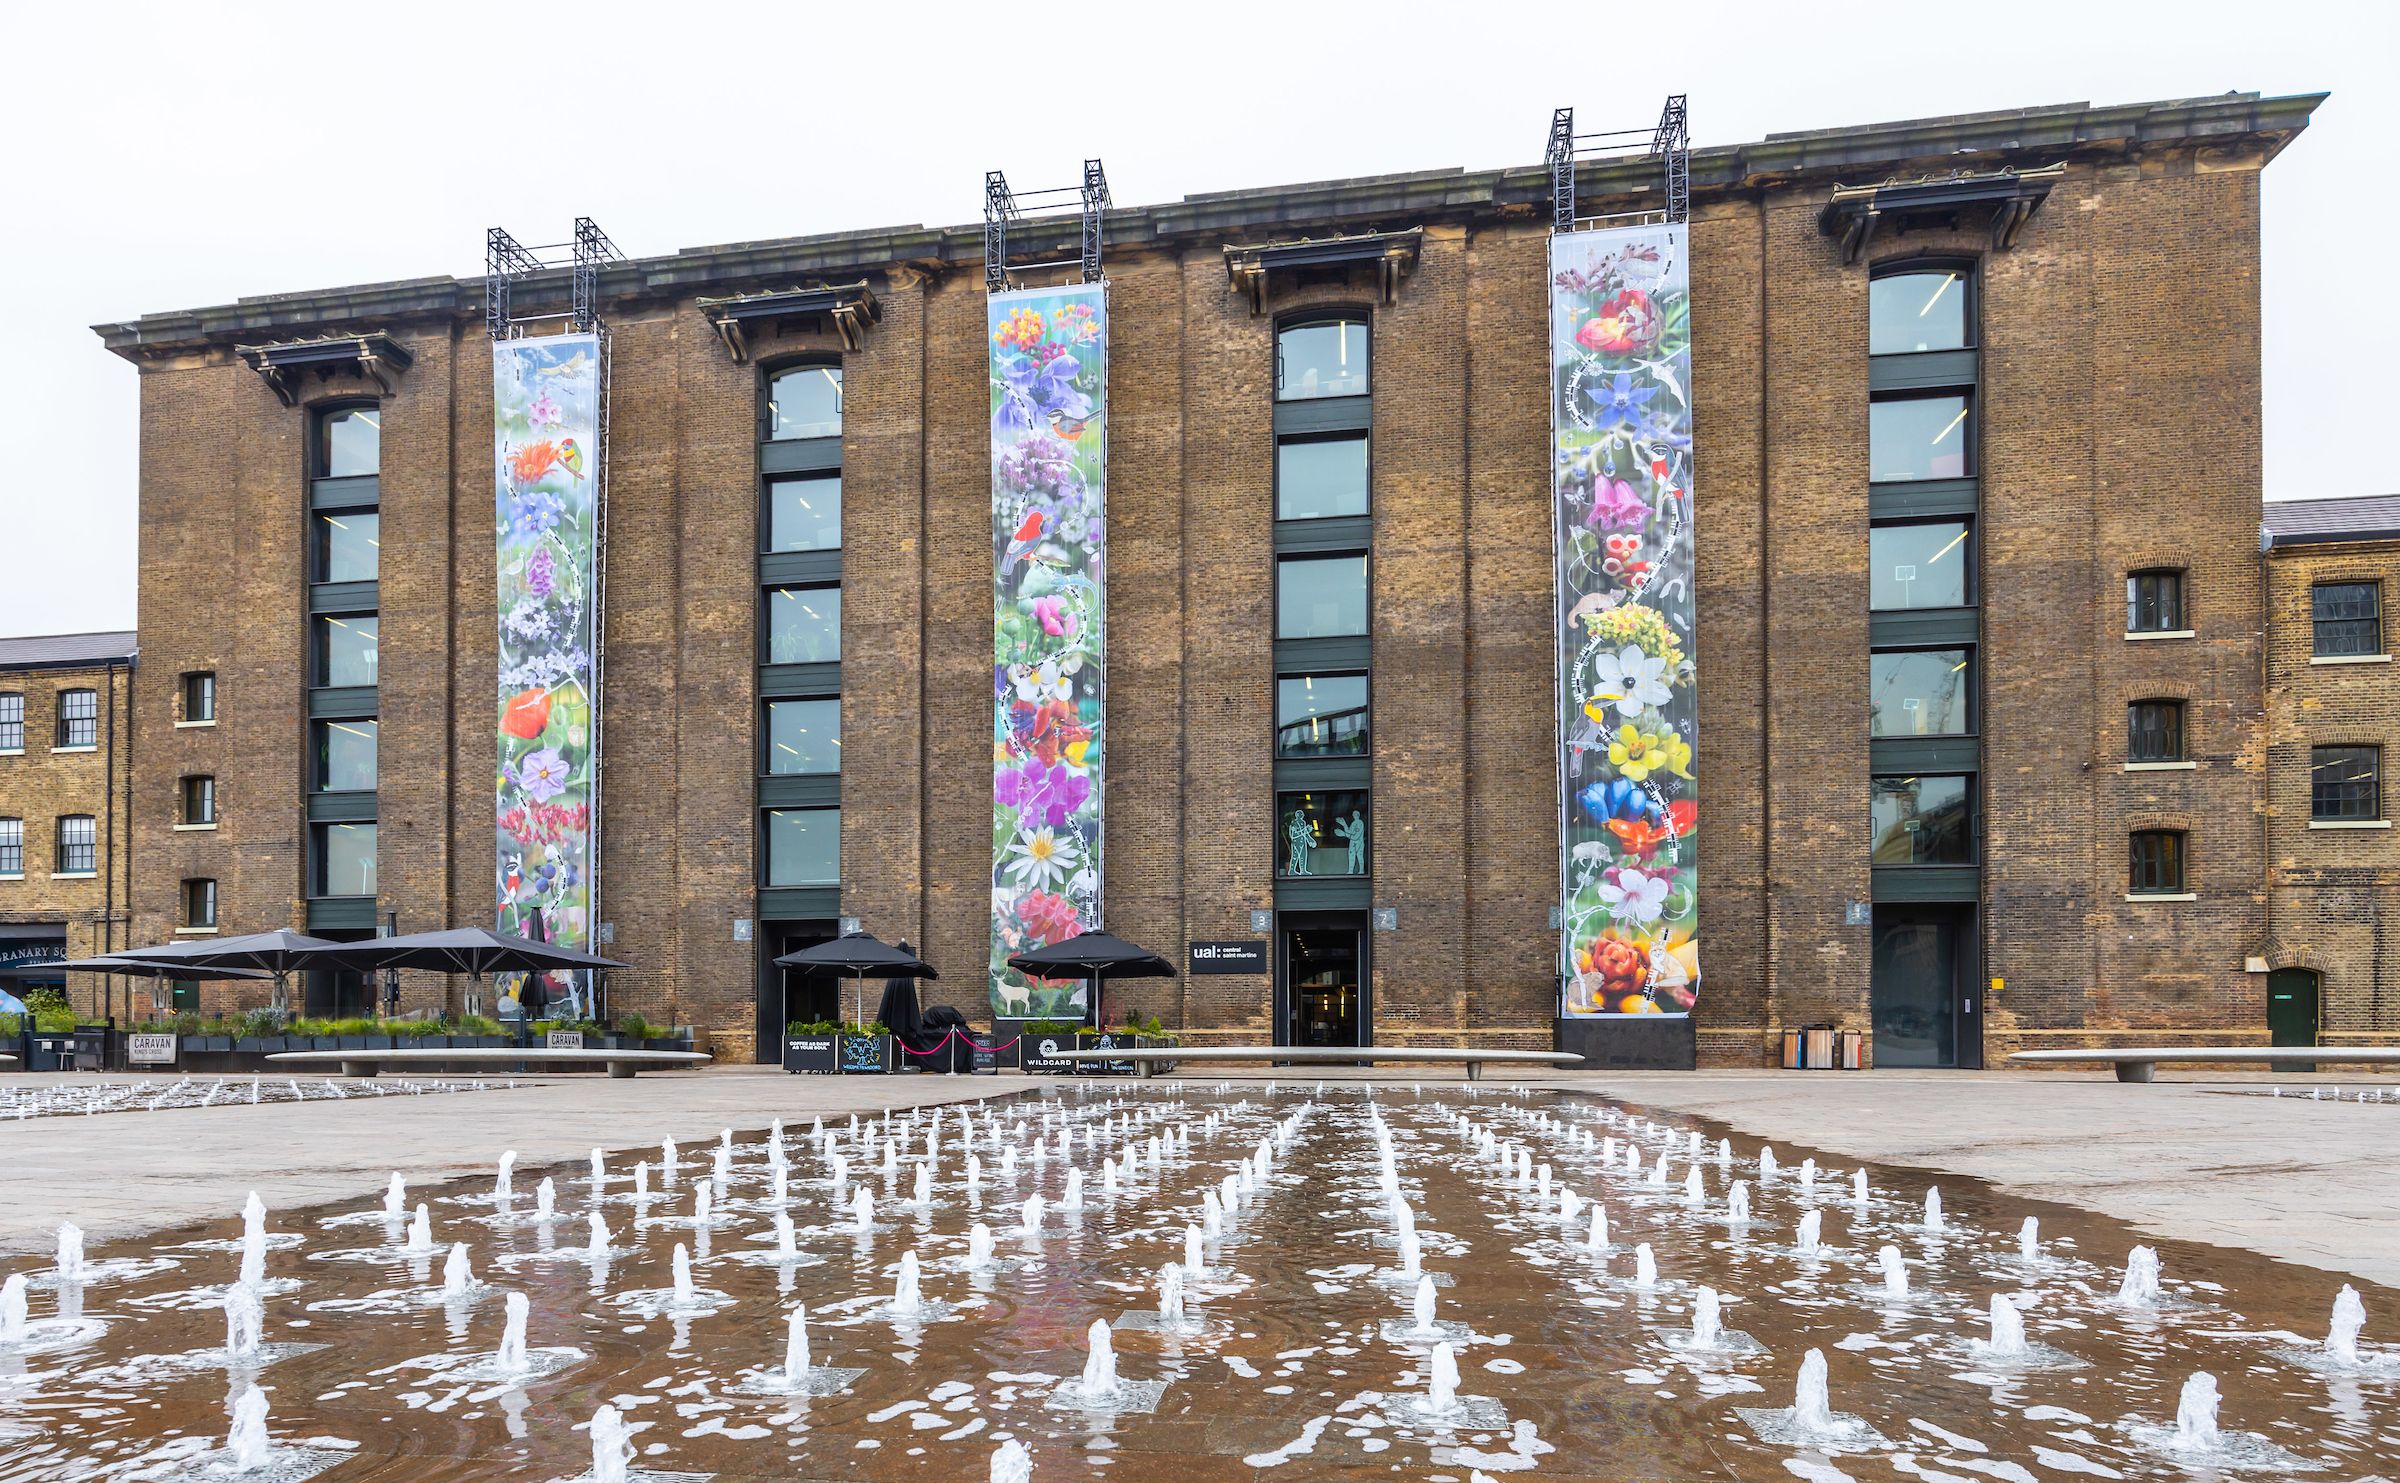 Three ground to roof vertical hanging botanical prints hanging on the front of the Central Saint Martins Granary Building, with the fountains in front visible